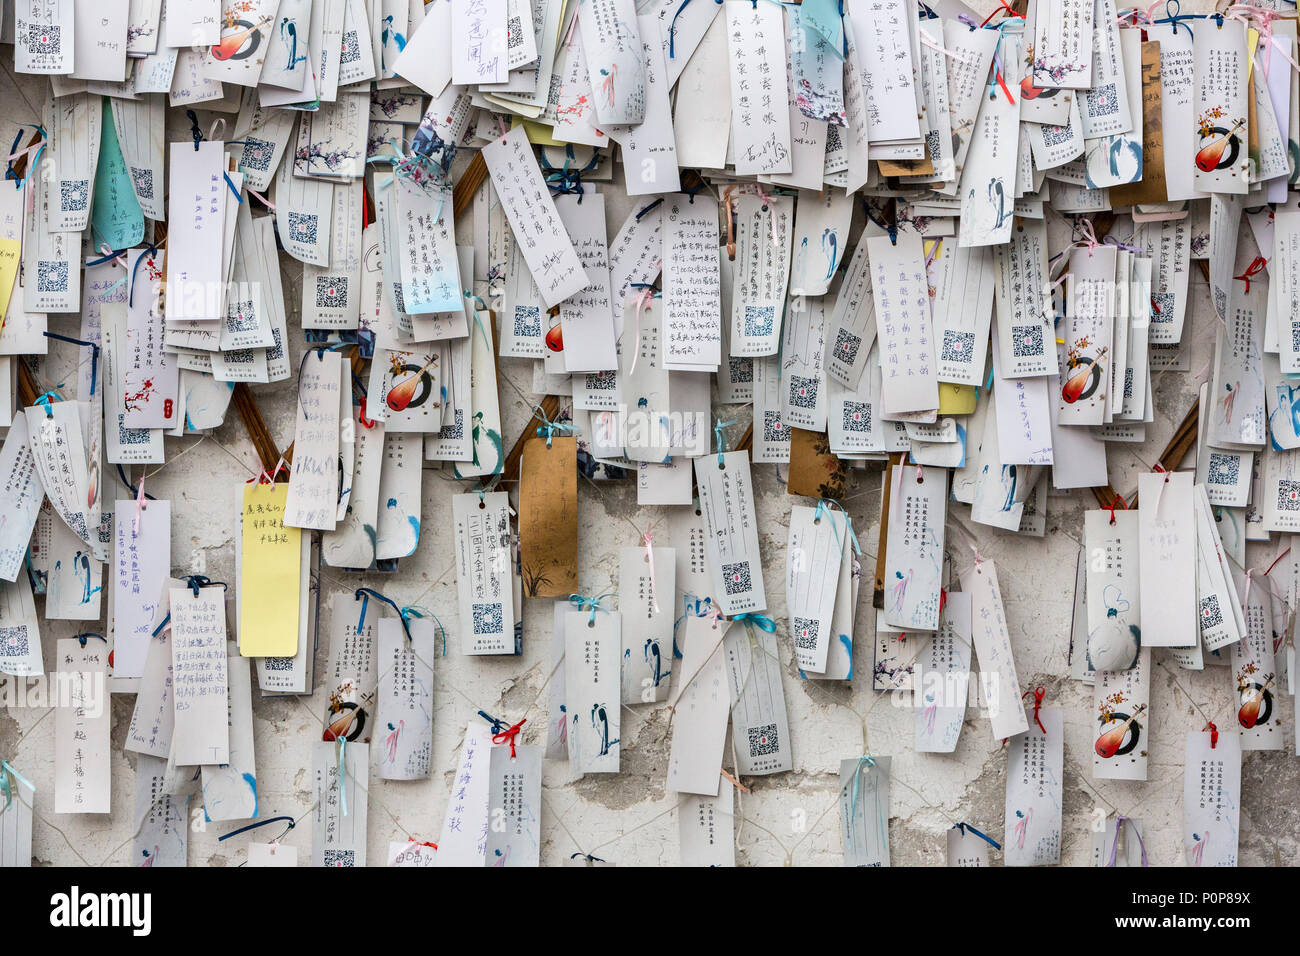 Suzhou, Jiangsu, China.  Tags Contain Hopes for Good Wishes, left by Passersby.  Shantang District. Stock Photo